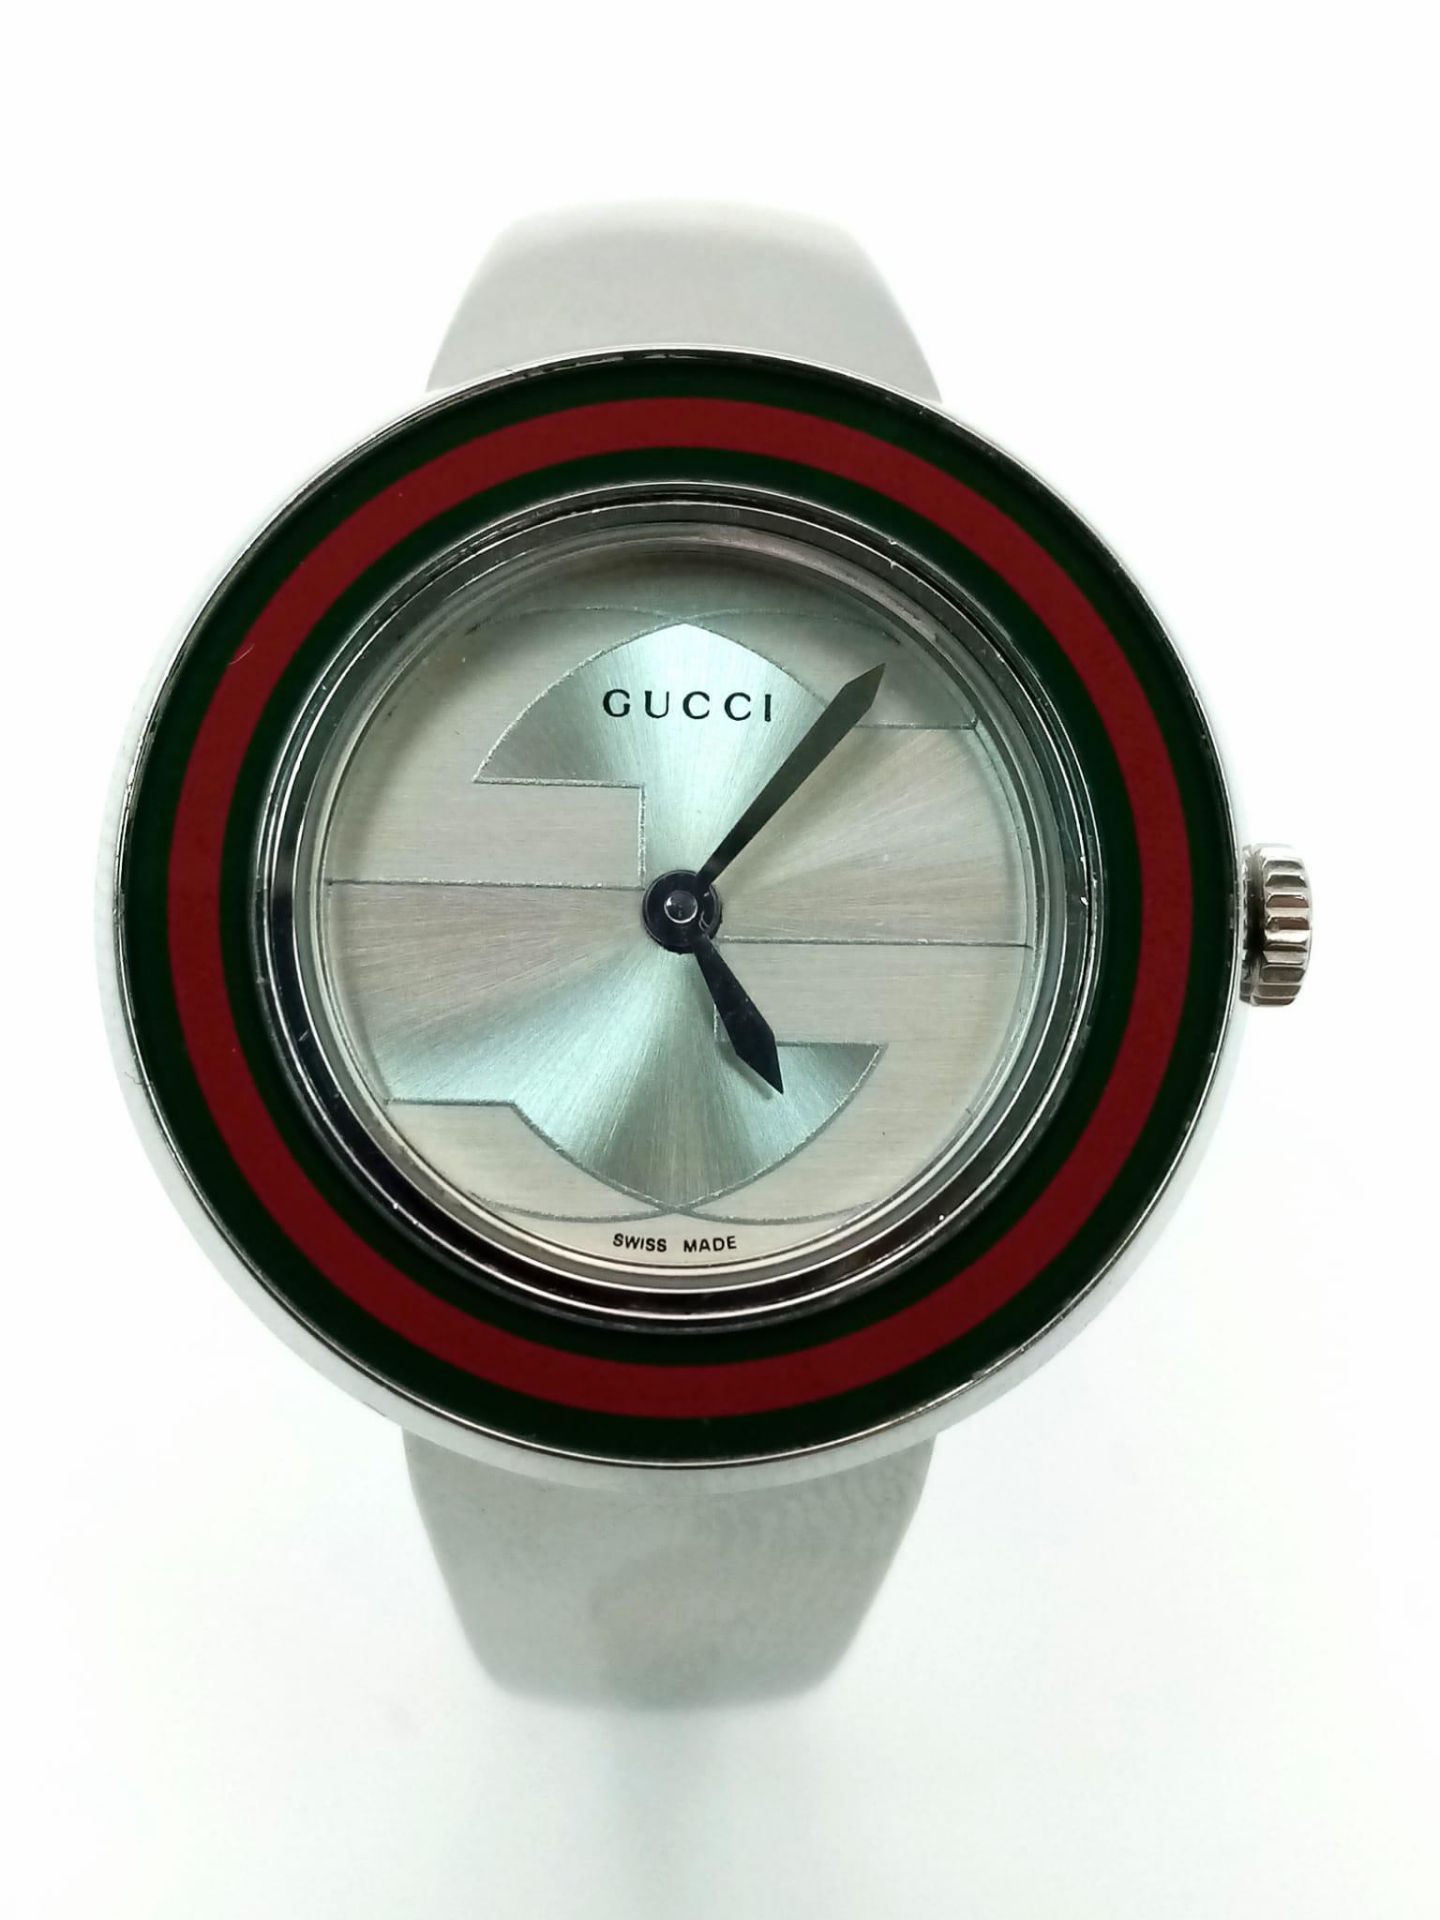 A Gucci Designer Ladies Quartz Watch. Stainless steel bracelet and case - 27mm. Silver tone dial. In